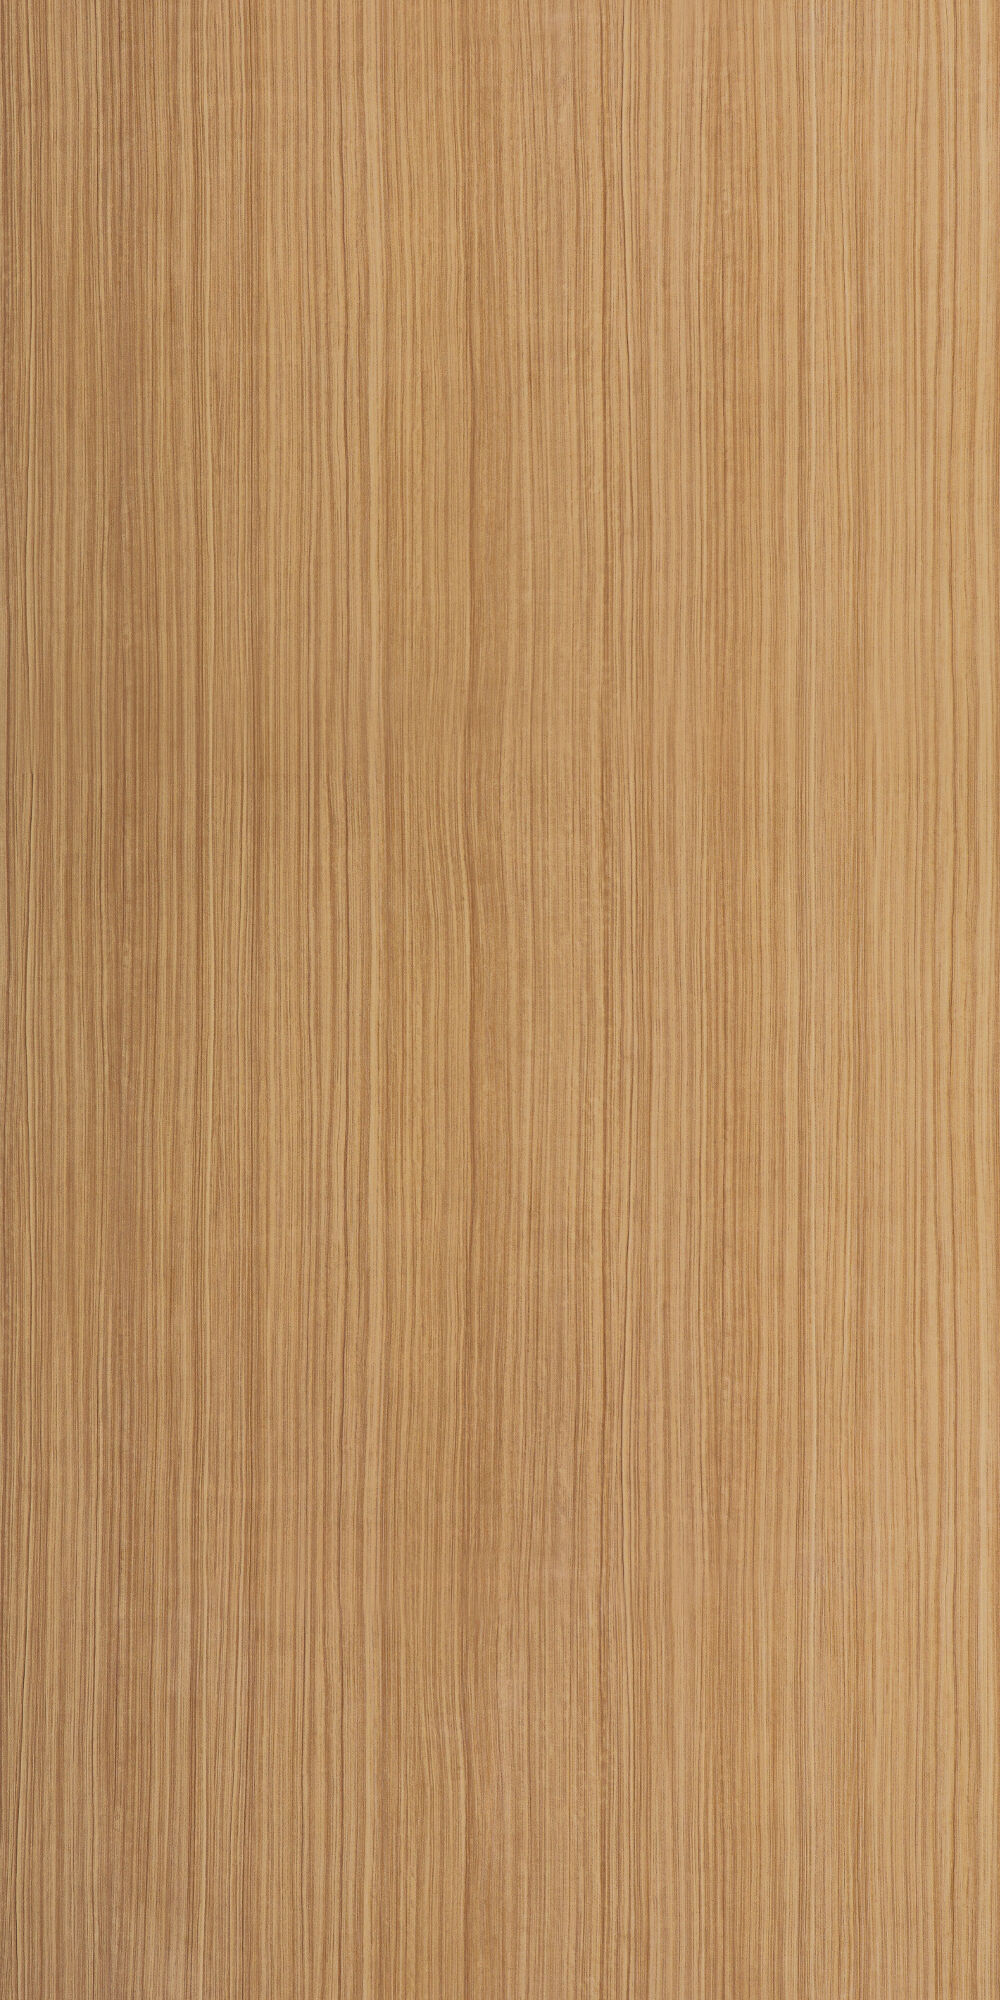 Download free picture Wood texture on CC-BY License ~ Free 